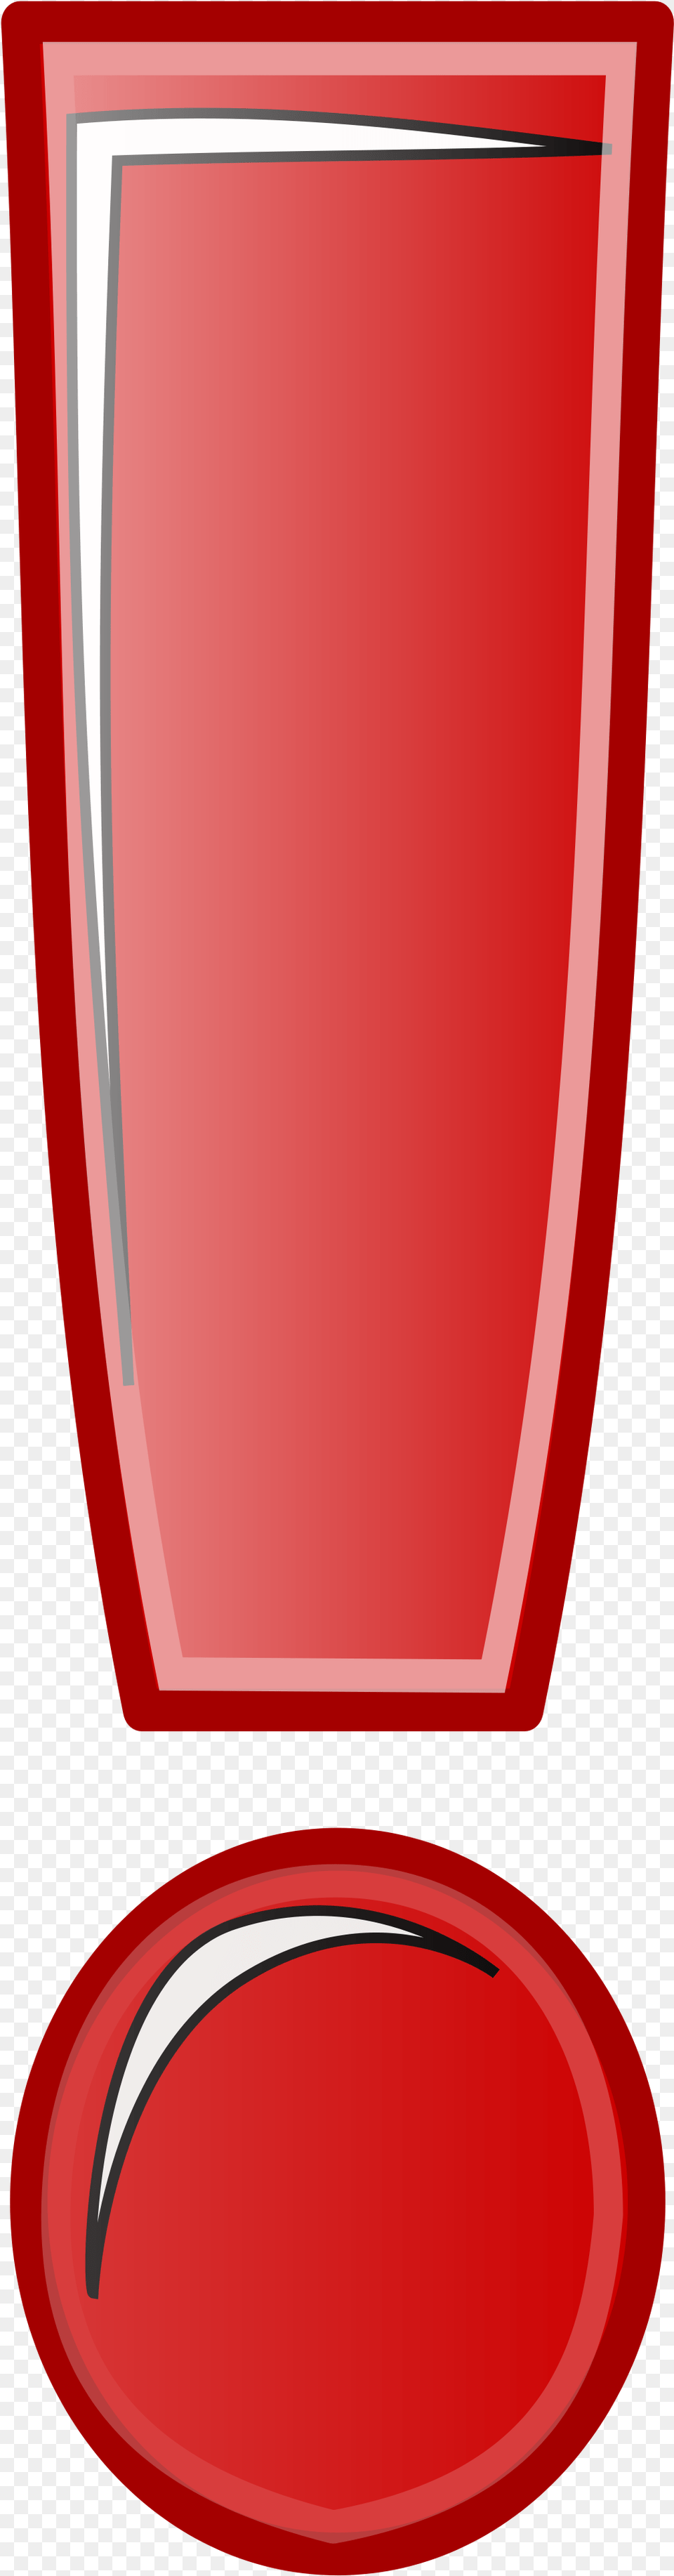 Transparent Background Exclamation Point, Bowl, Glass, Cup Png